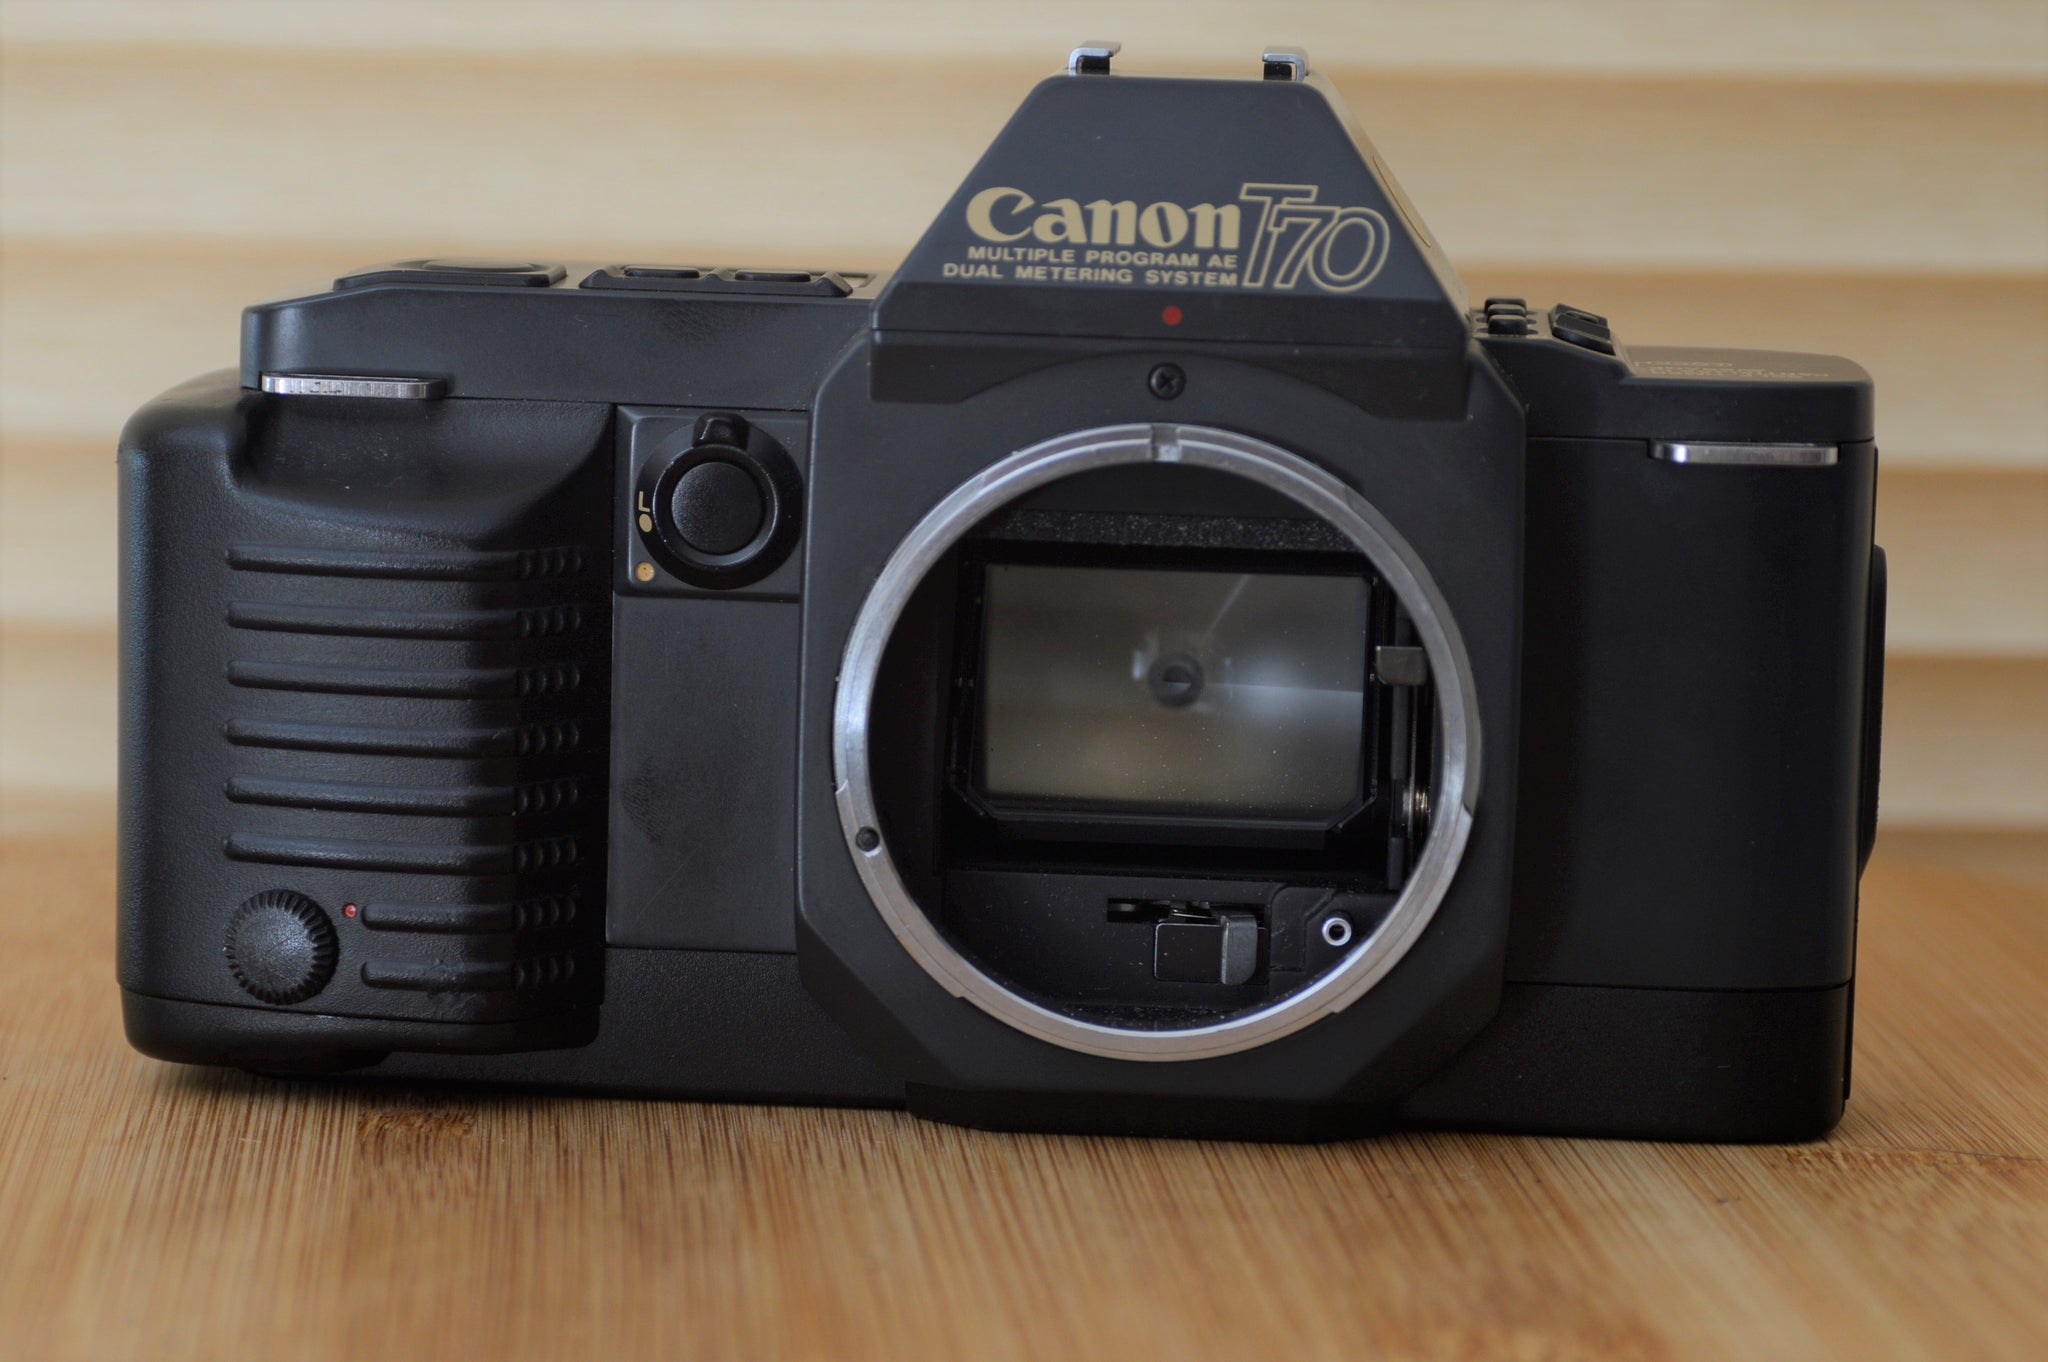 Canon T70 35mm SLR Camera. Near Mint condition, cleaned and tested. feels just like a digital - It couldn't be easier! - RewindCameras quality vintage cameras, fully tested and serviced